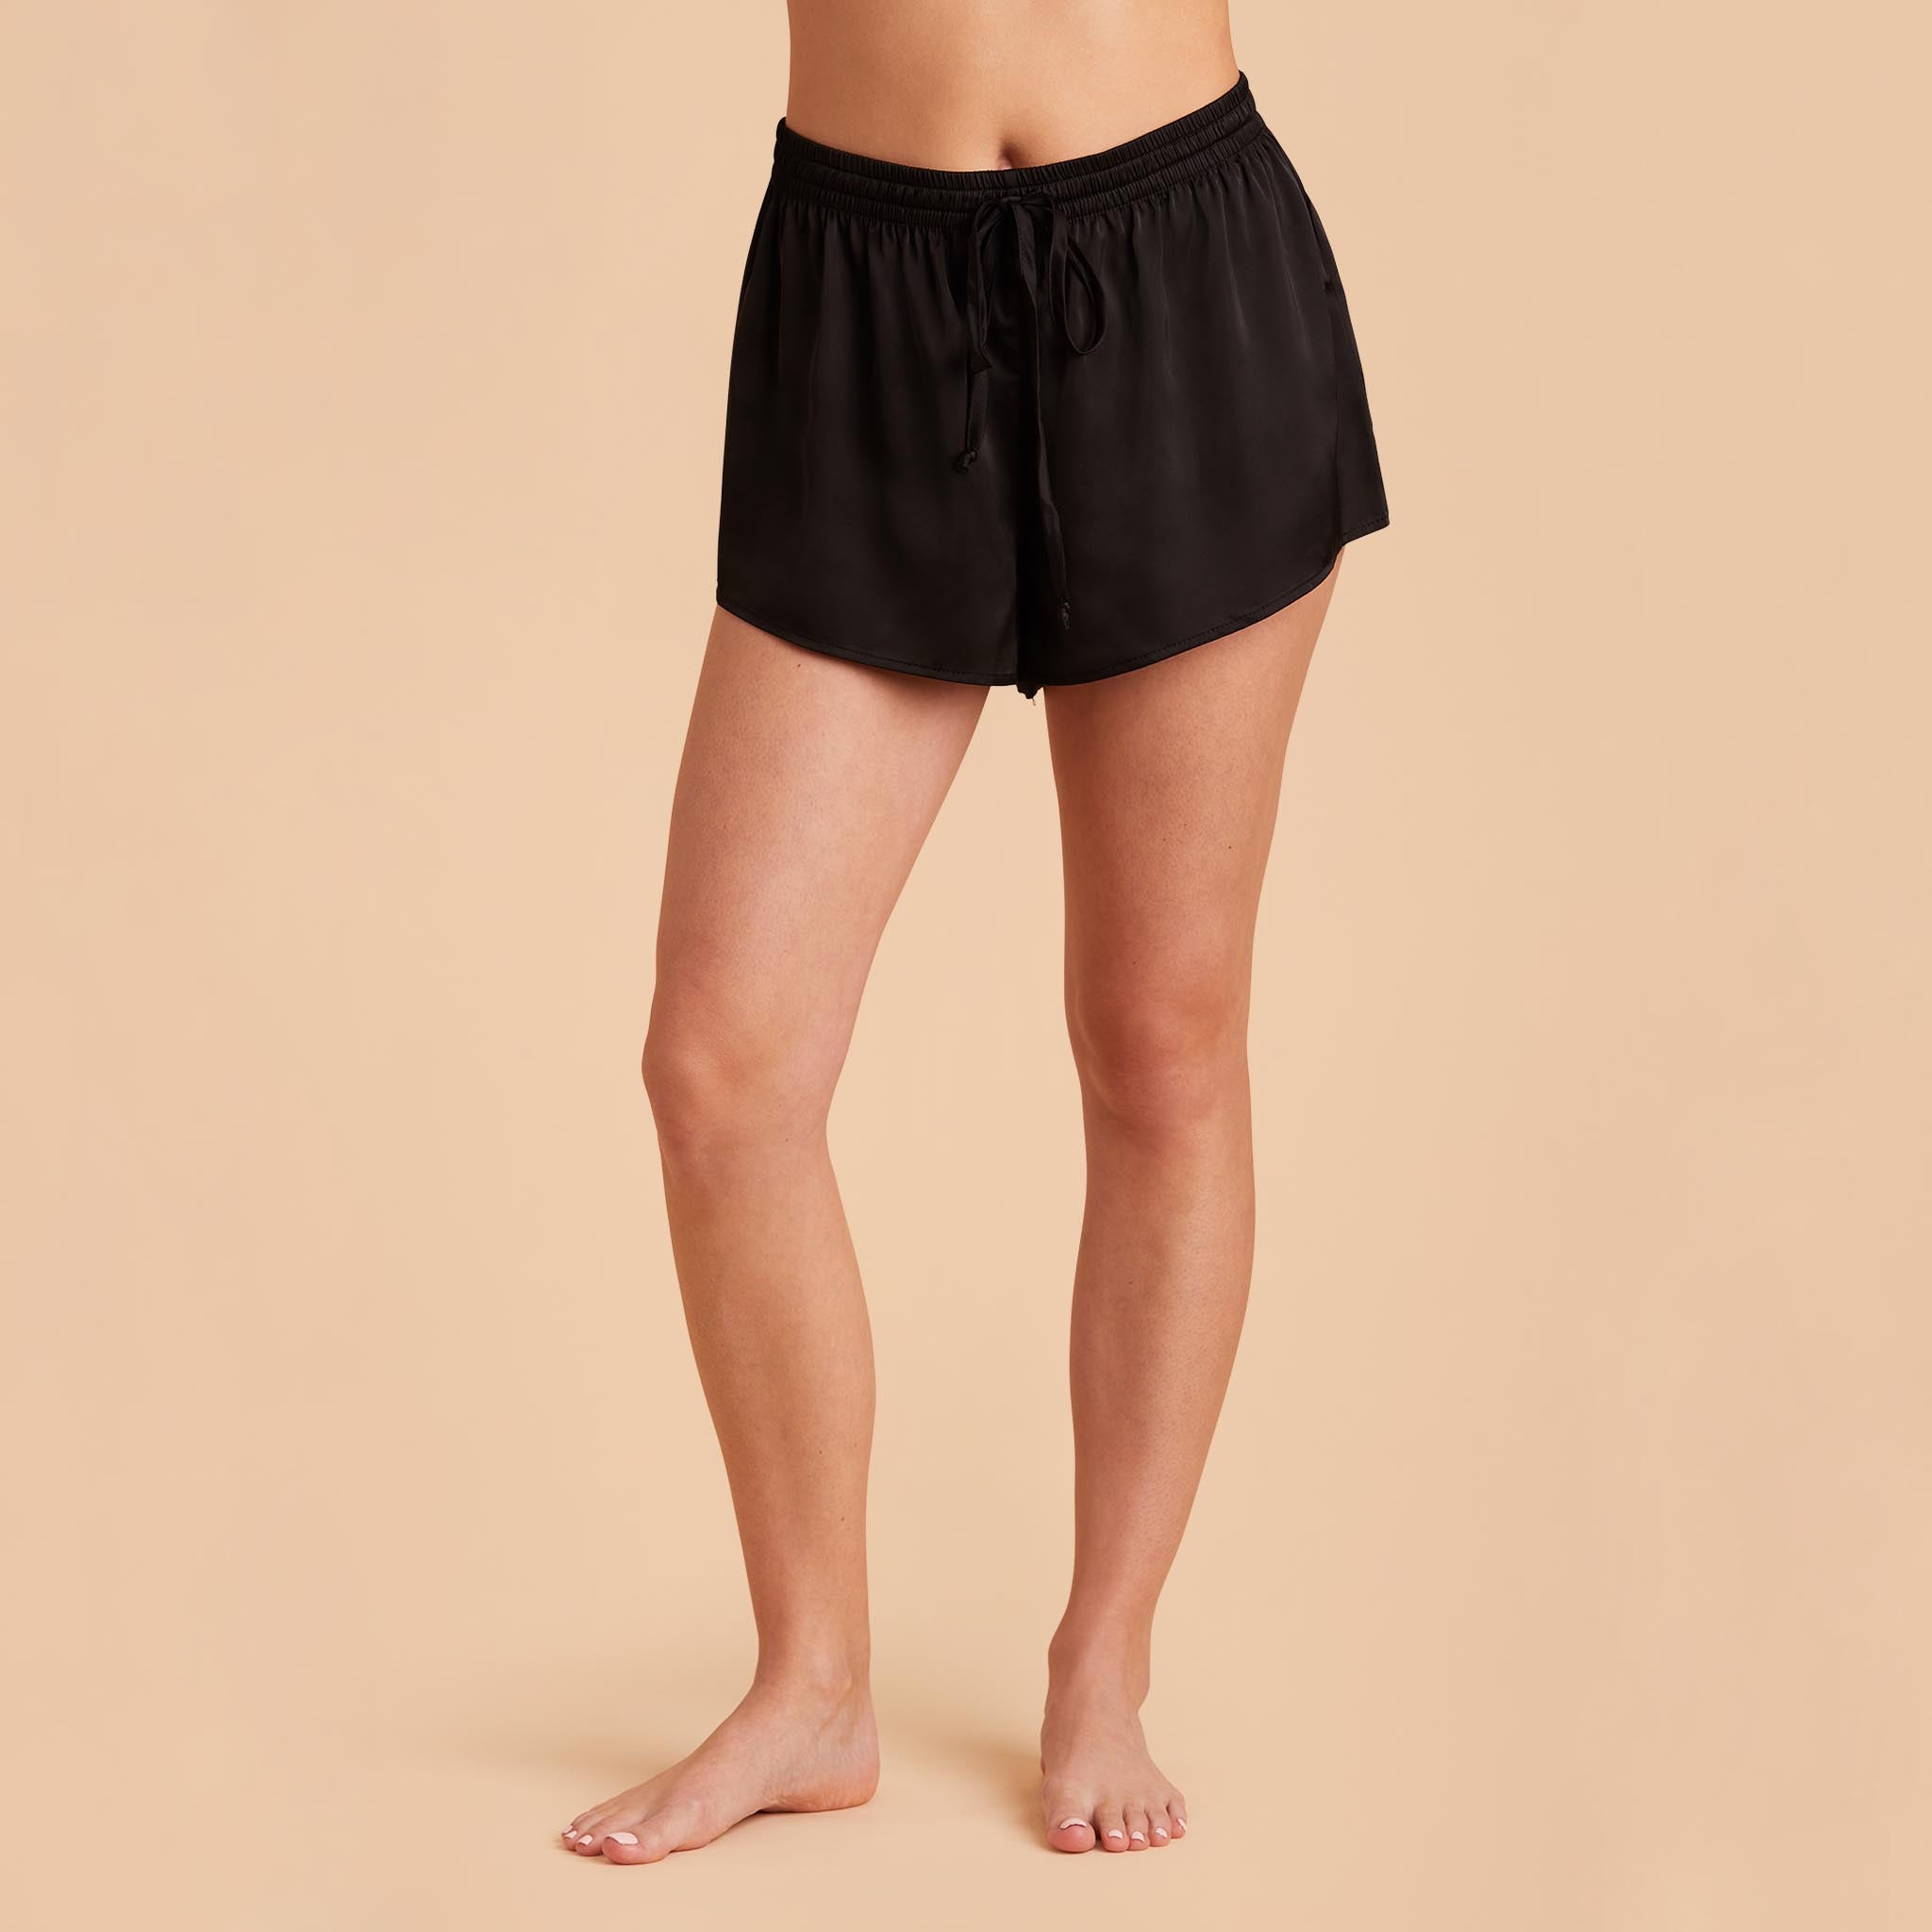 Olivia PJ Shorts in black front view